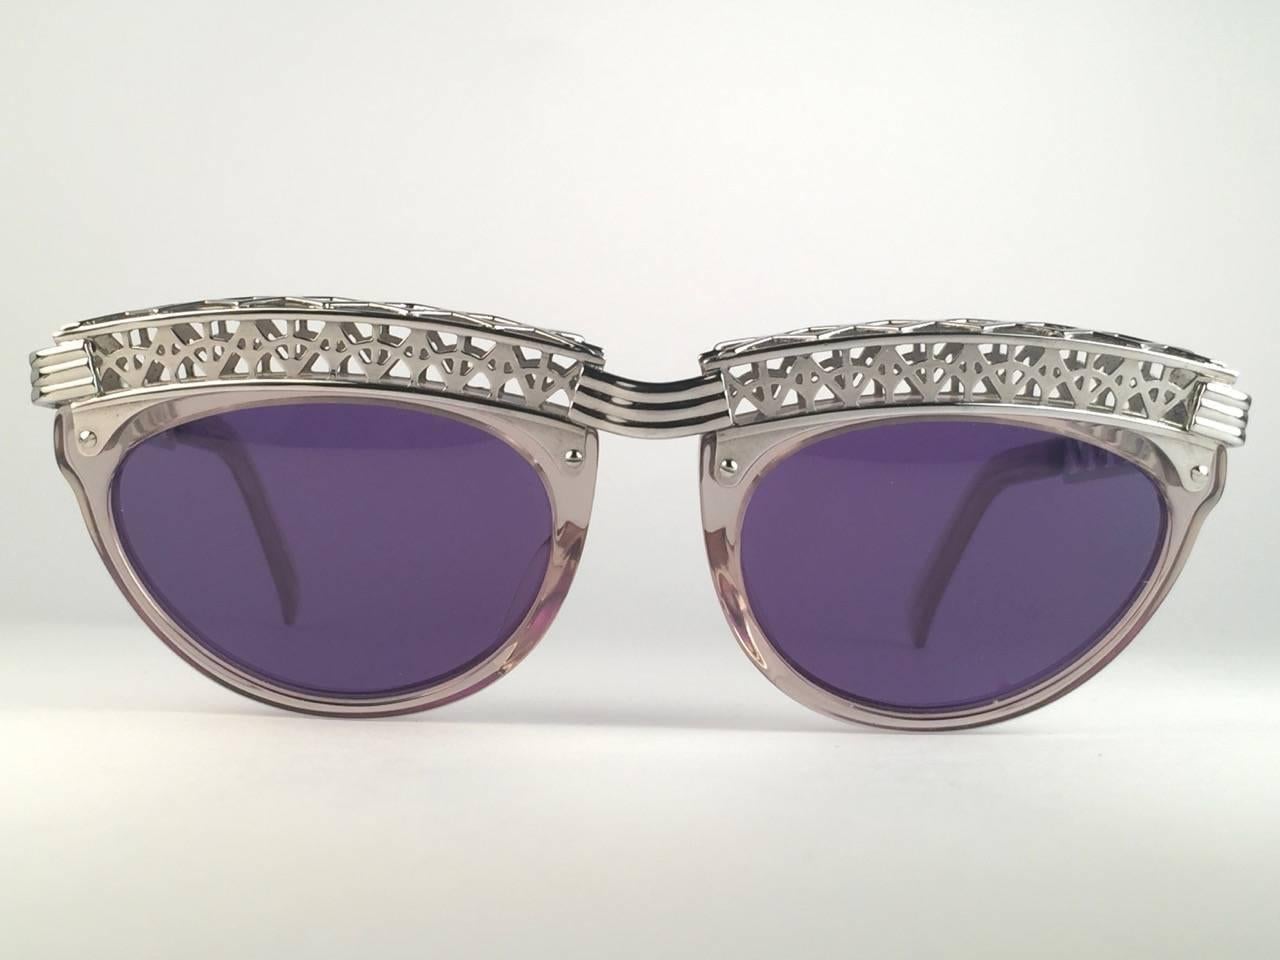 Superb Collectors Item!!
New Jean Paul Gaultier 56 0271 Eiffel Tower clear frame. 
Spotless dark purple lenses that complete a ready to wear JPG look.

Amazing design with strong yet intricate details.
Design and produced in the 1900's.
New, never